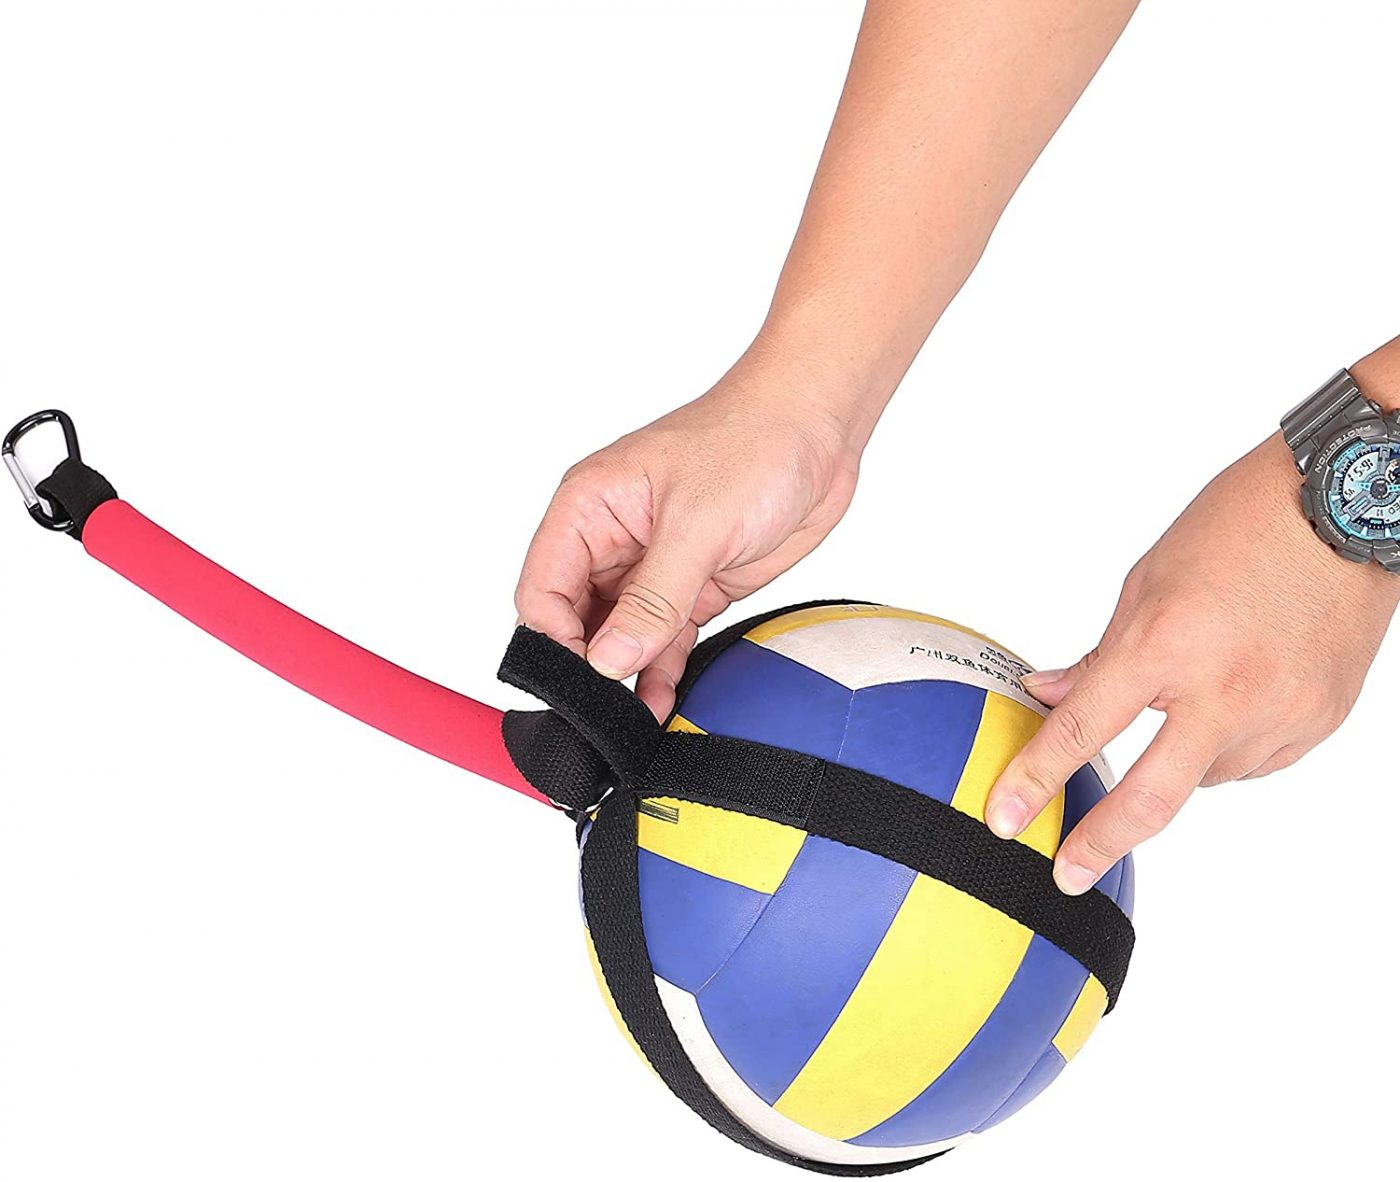 Why Invest in Top-Quality Volleyball Training Aids?